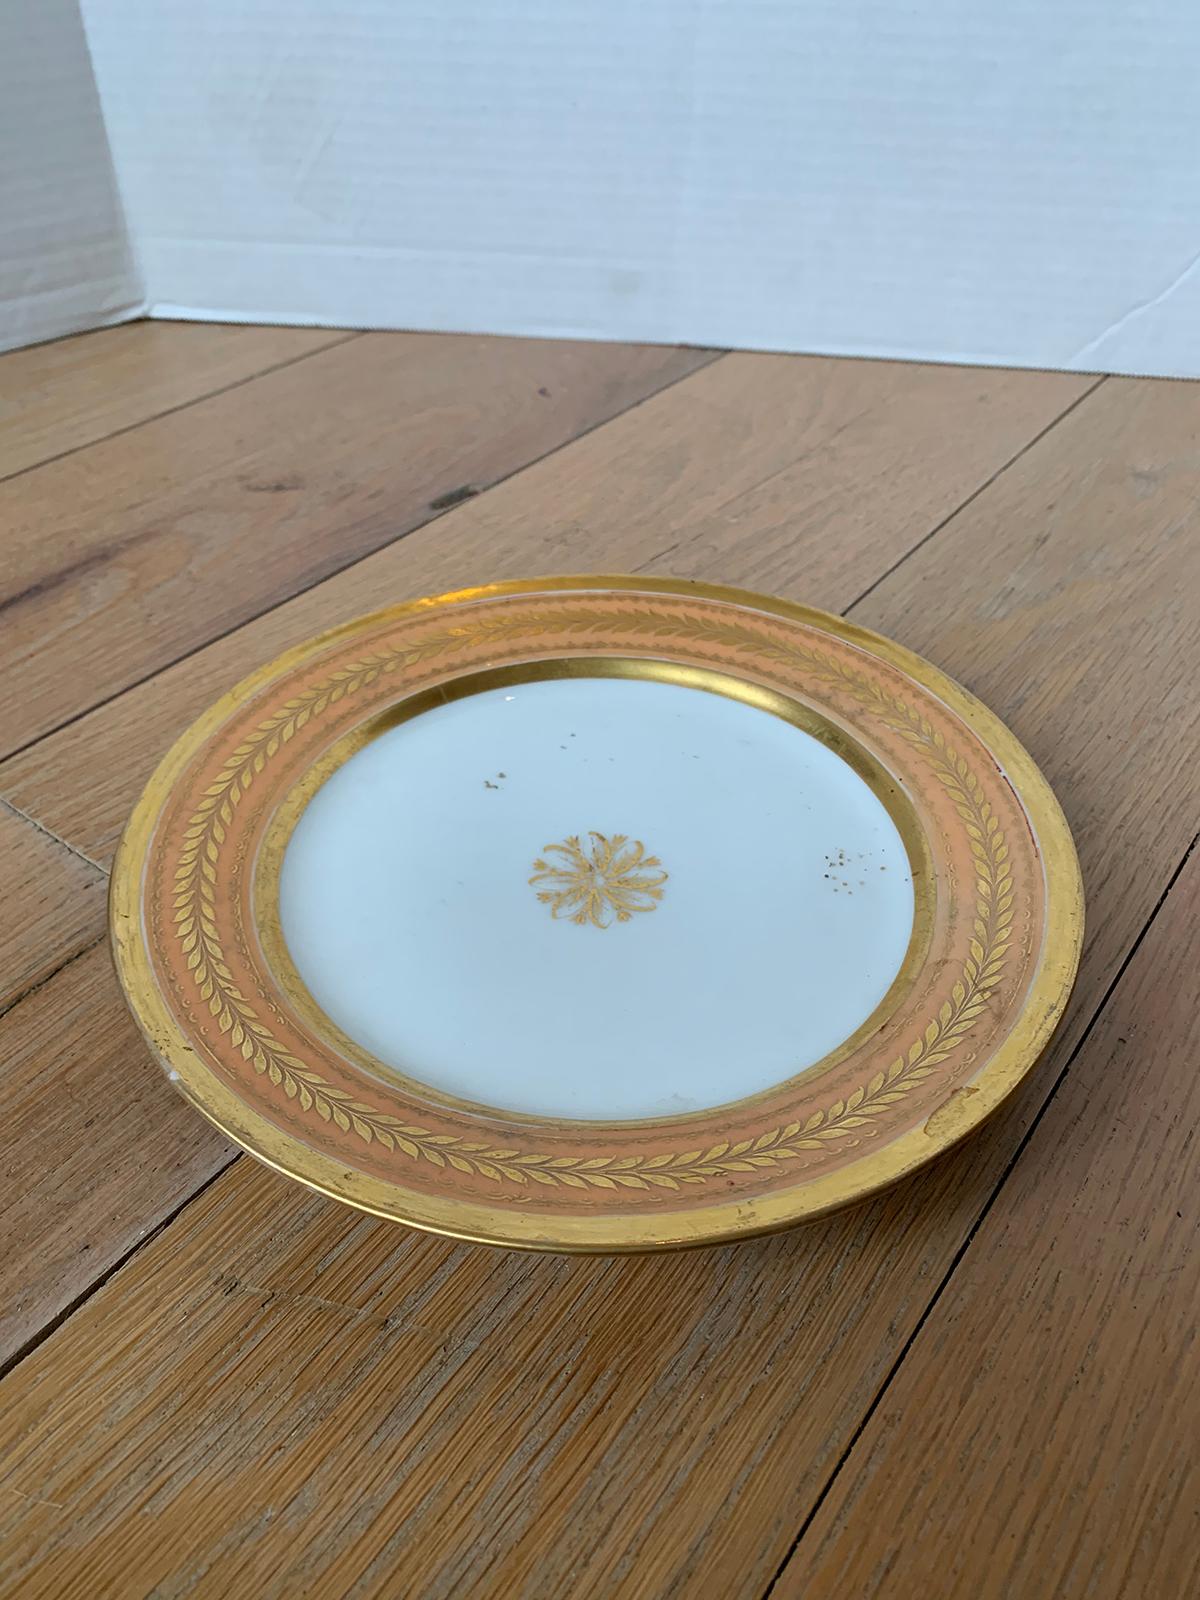 19th Century Continental Porcelain Plate, Gilt Details, Faint X-Impressed Mark In Good Condition For Sale In Atlanta, GA